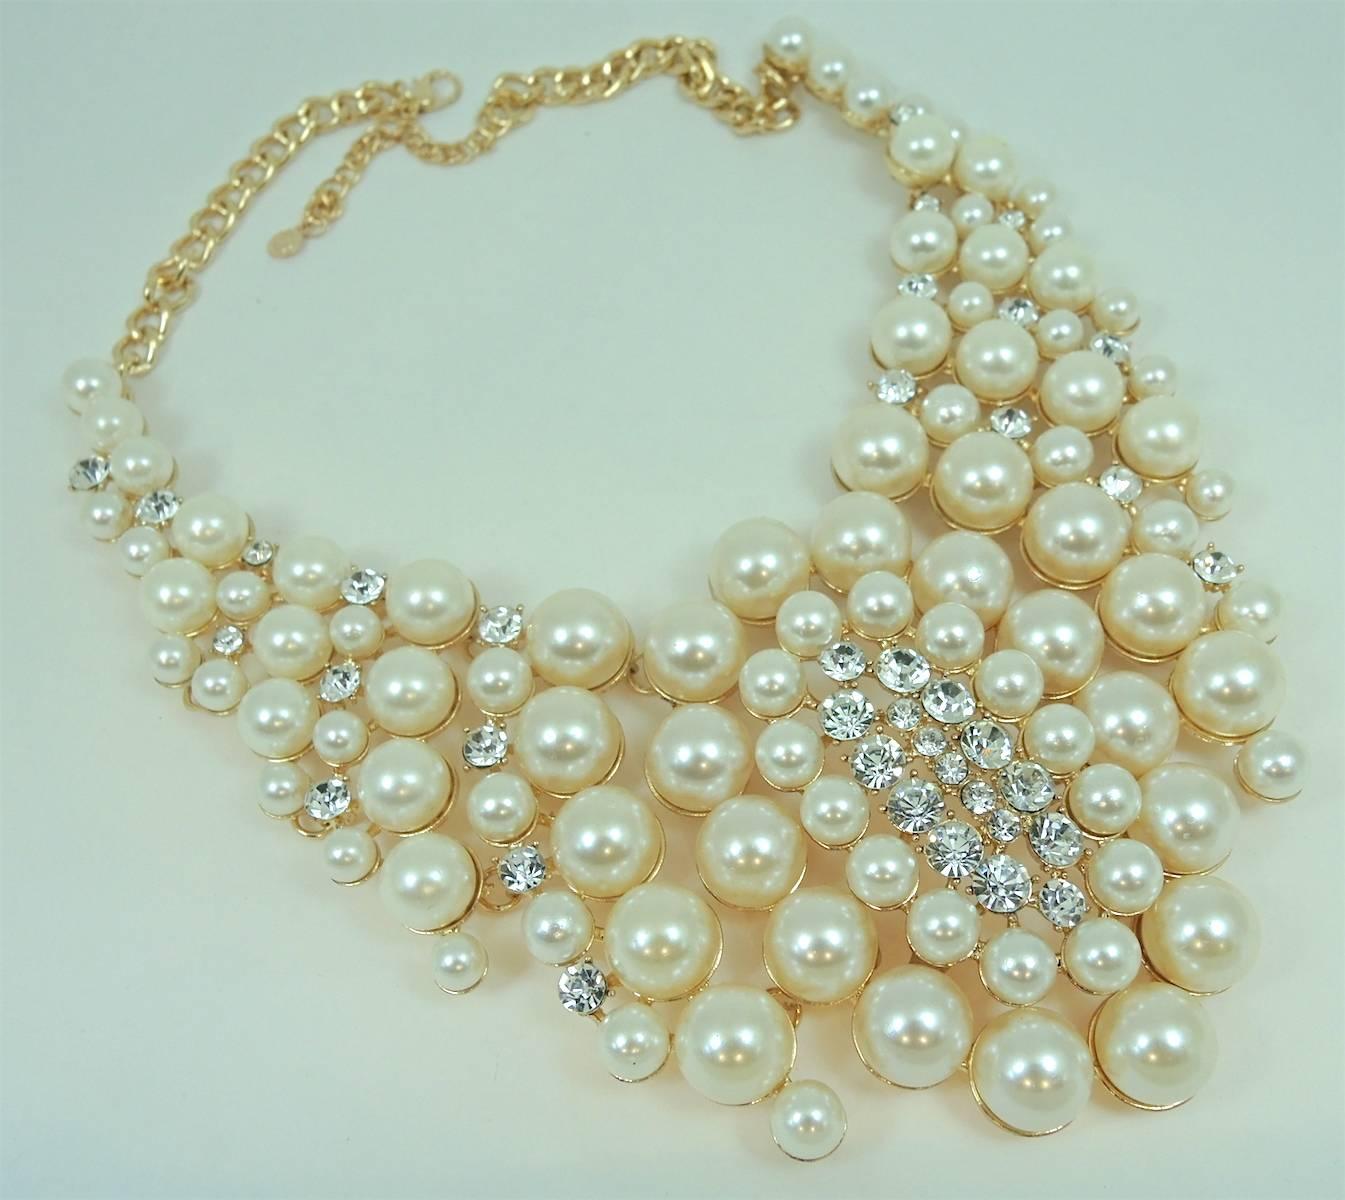 This chunky necklace was made and designed by Courrege, the great designer from France and I am delighted to have found it.  This necklace has segments of large faux cascading faux pearls and is set in a gold tone setting. It has an open link chain